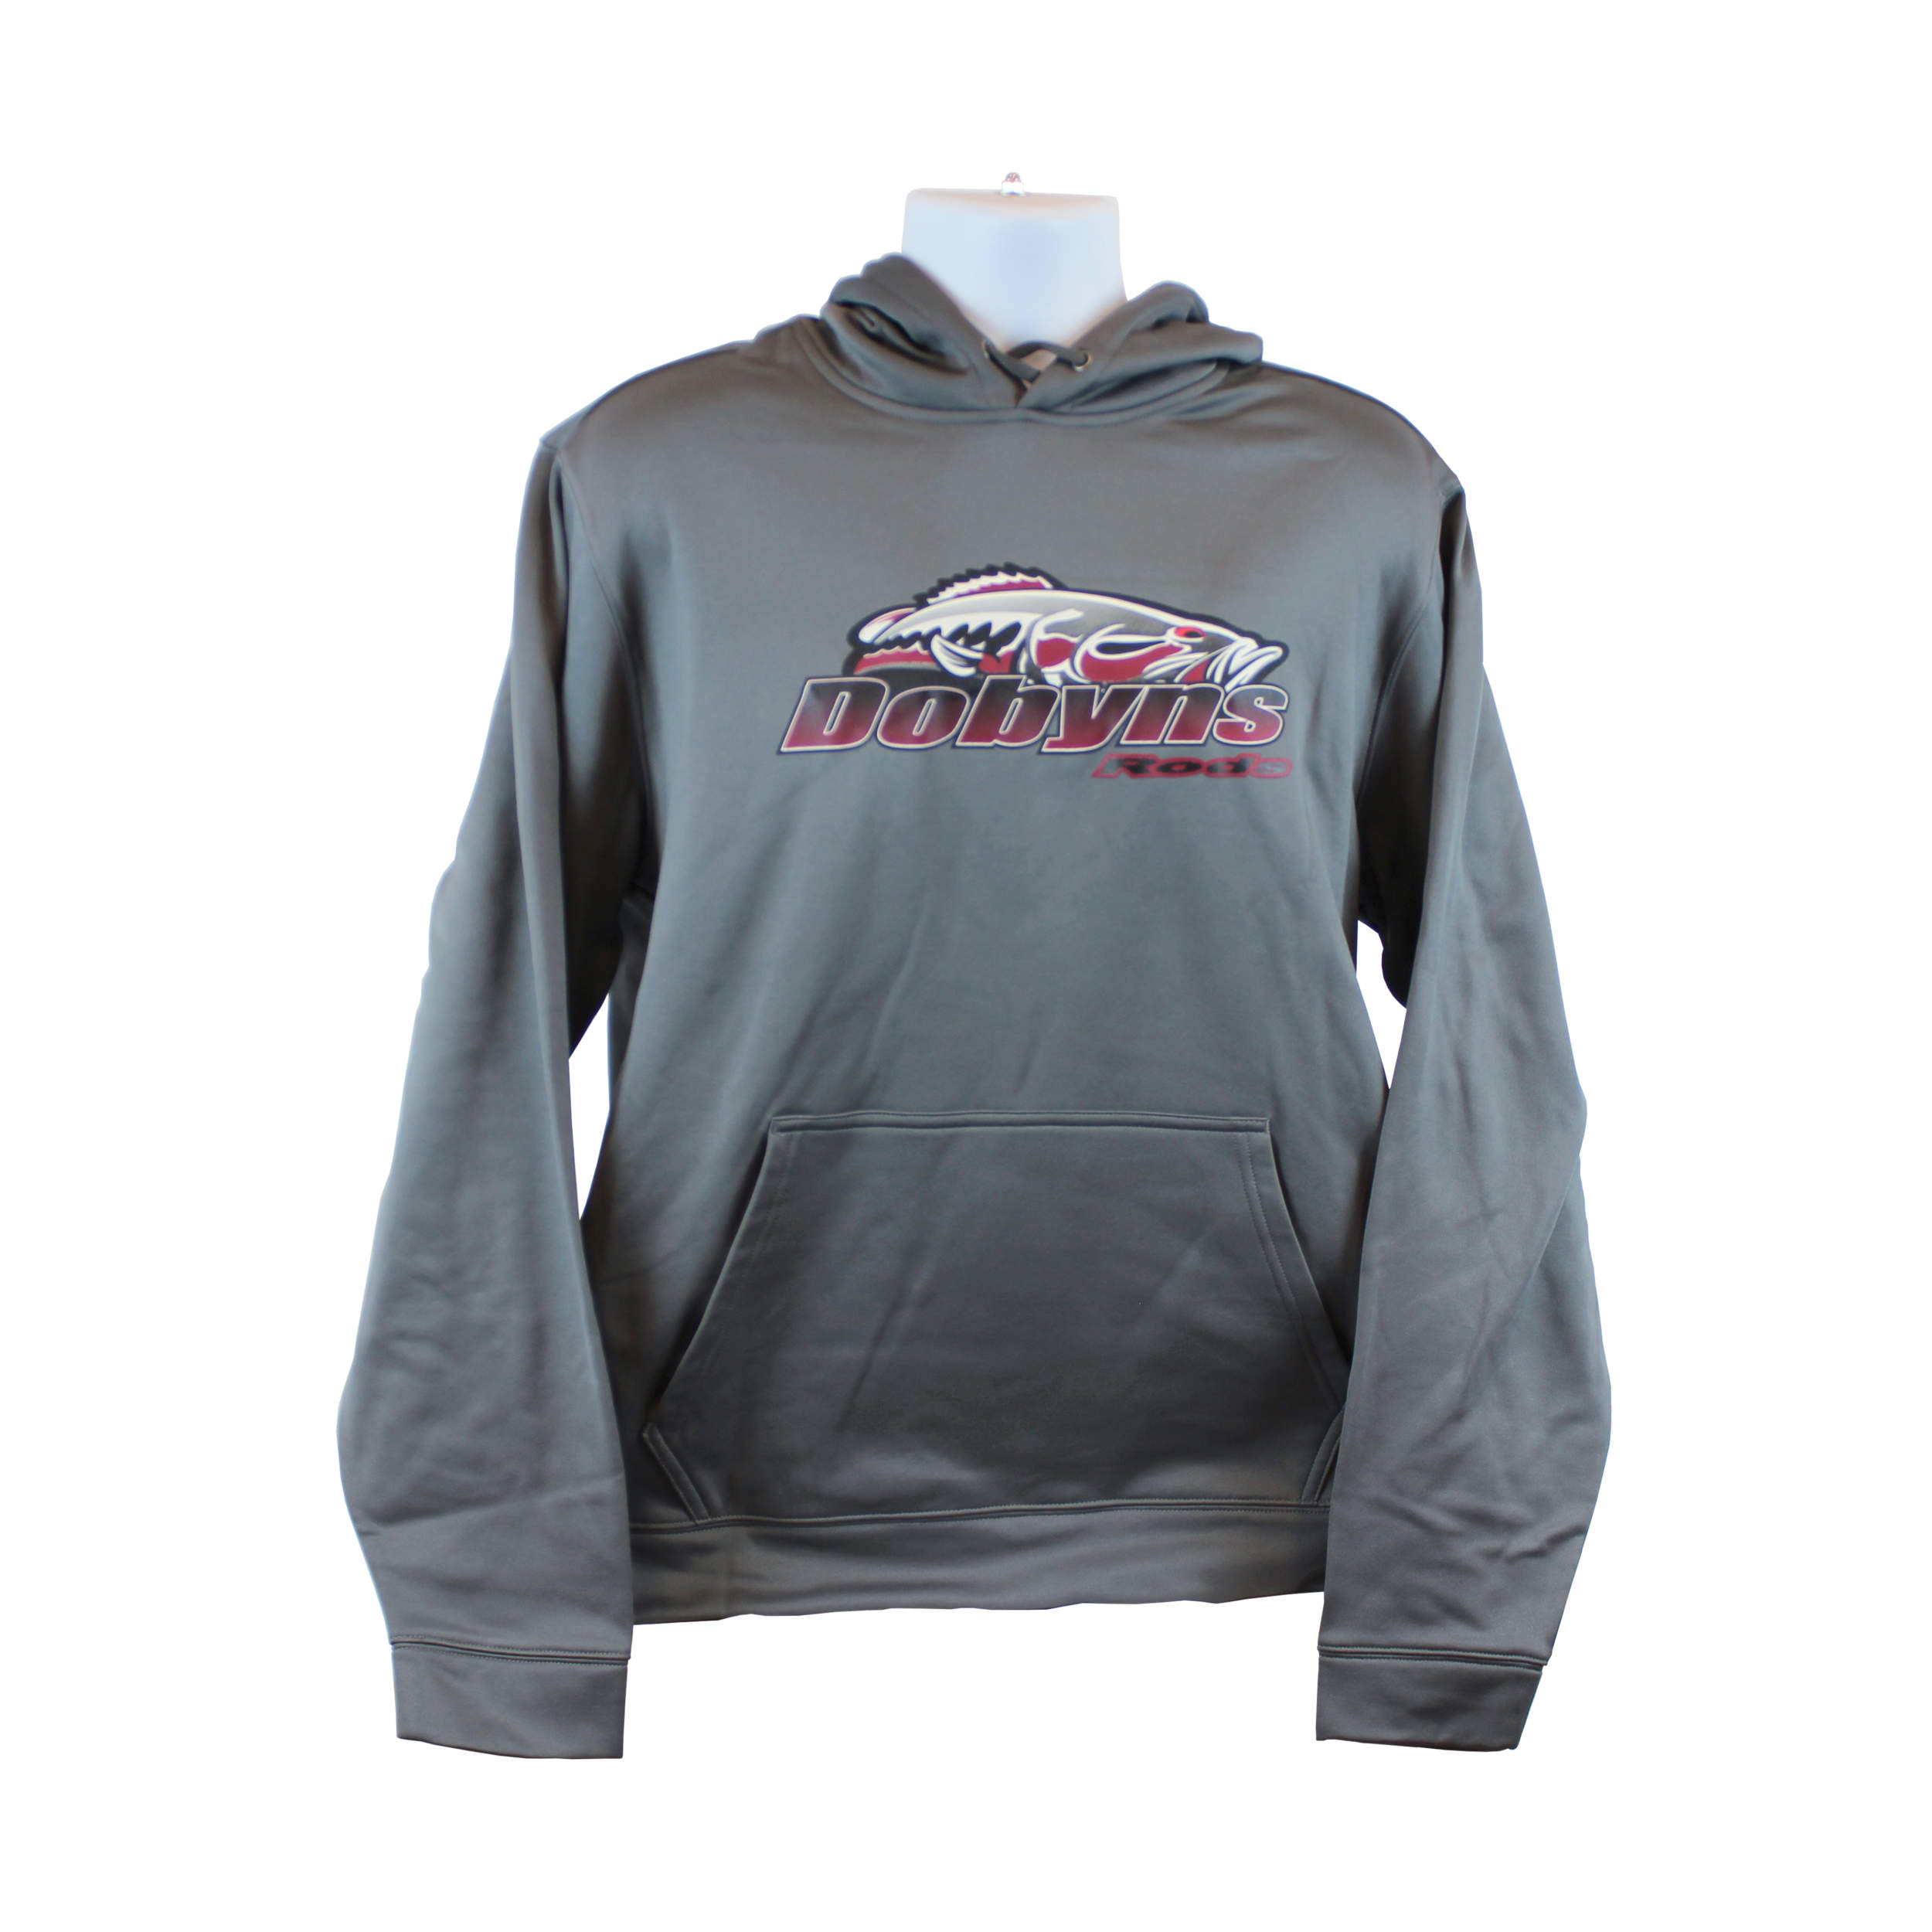 Dobyns Polyester Hoodie-Gray with Maroon logo